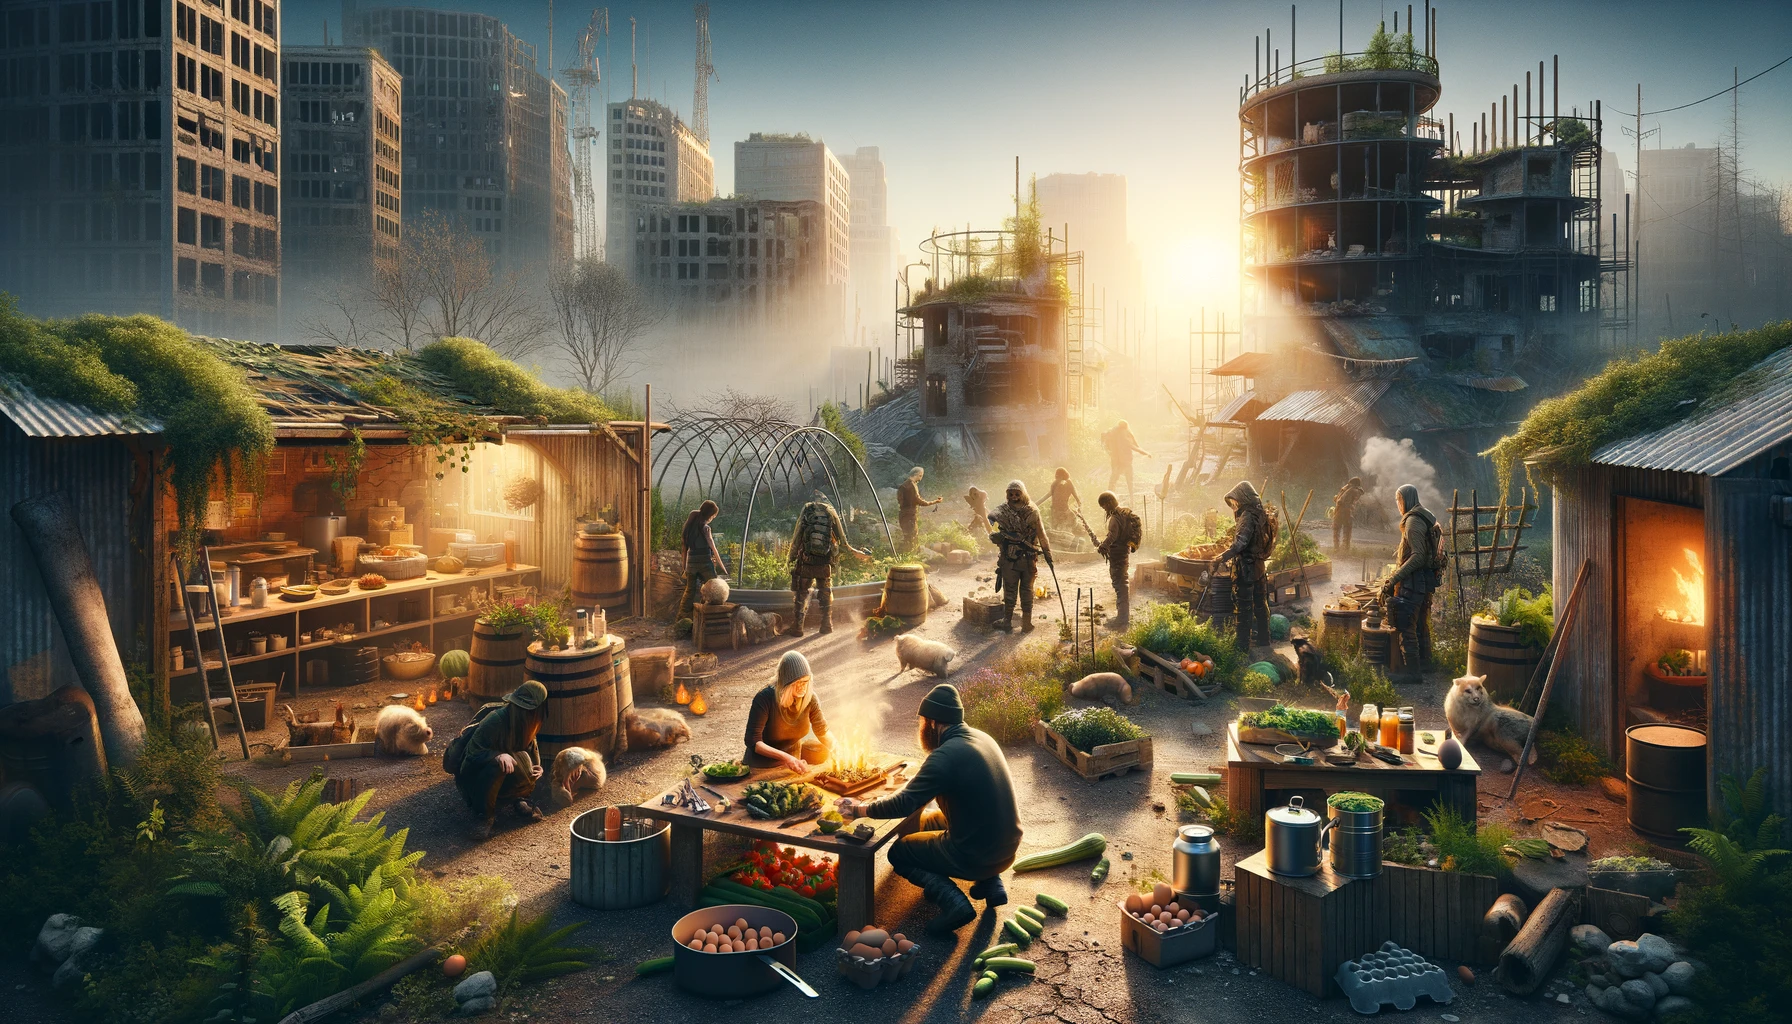 Post-apocalyptic urban survival garden with survivors preparing a balanced meal from harvested vegetables and small livestock, set against urban ruins at sunset, embodying hope, self-reliance, and innovative survival strategies